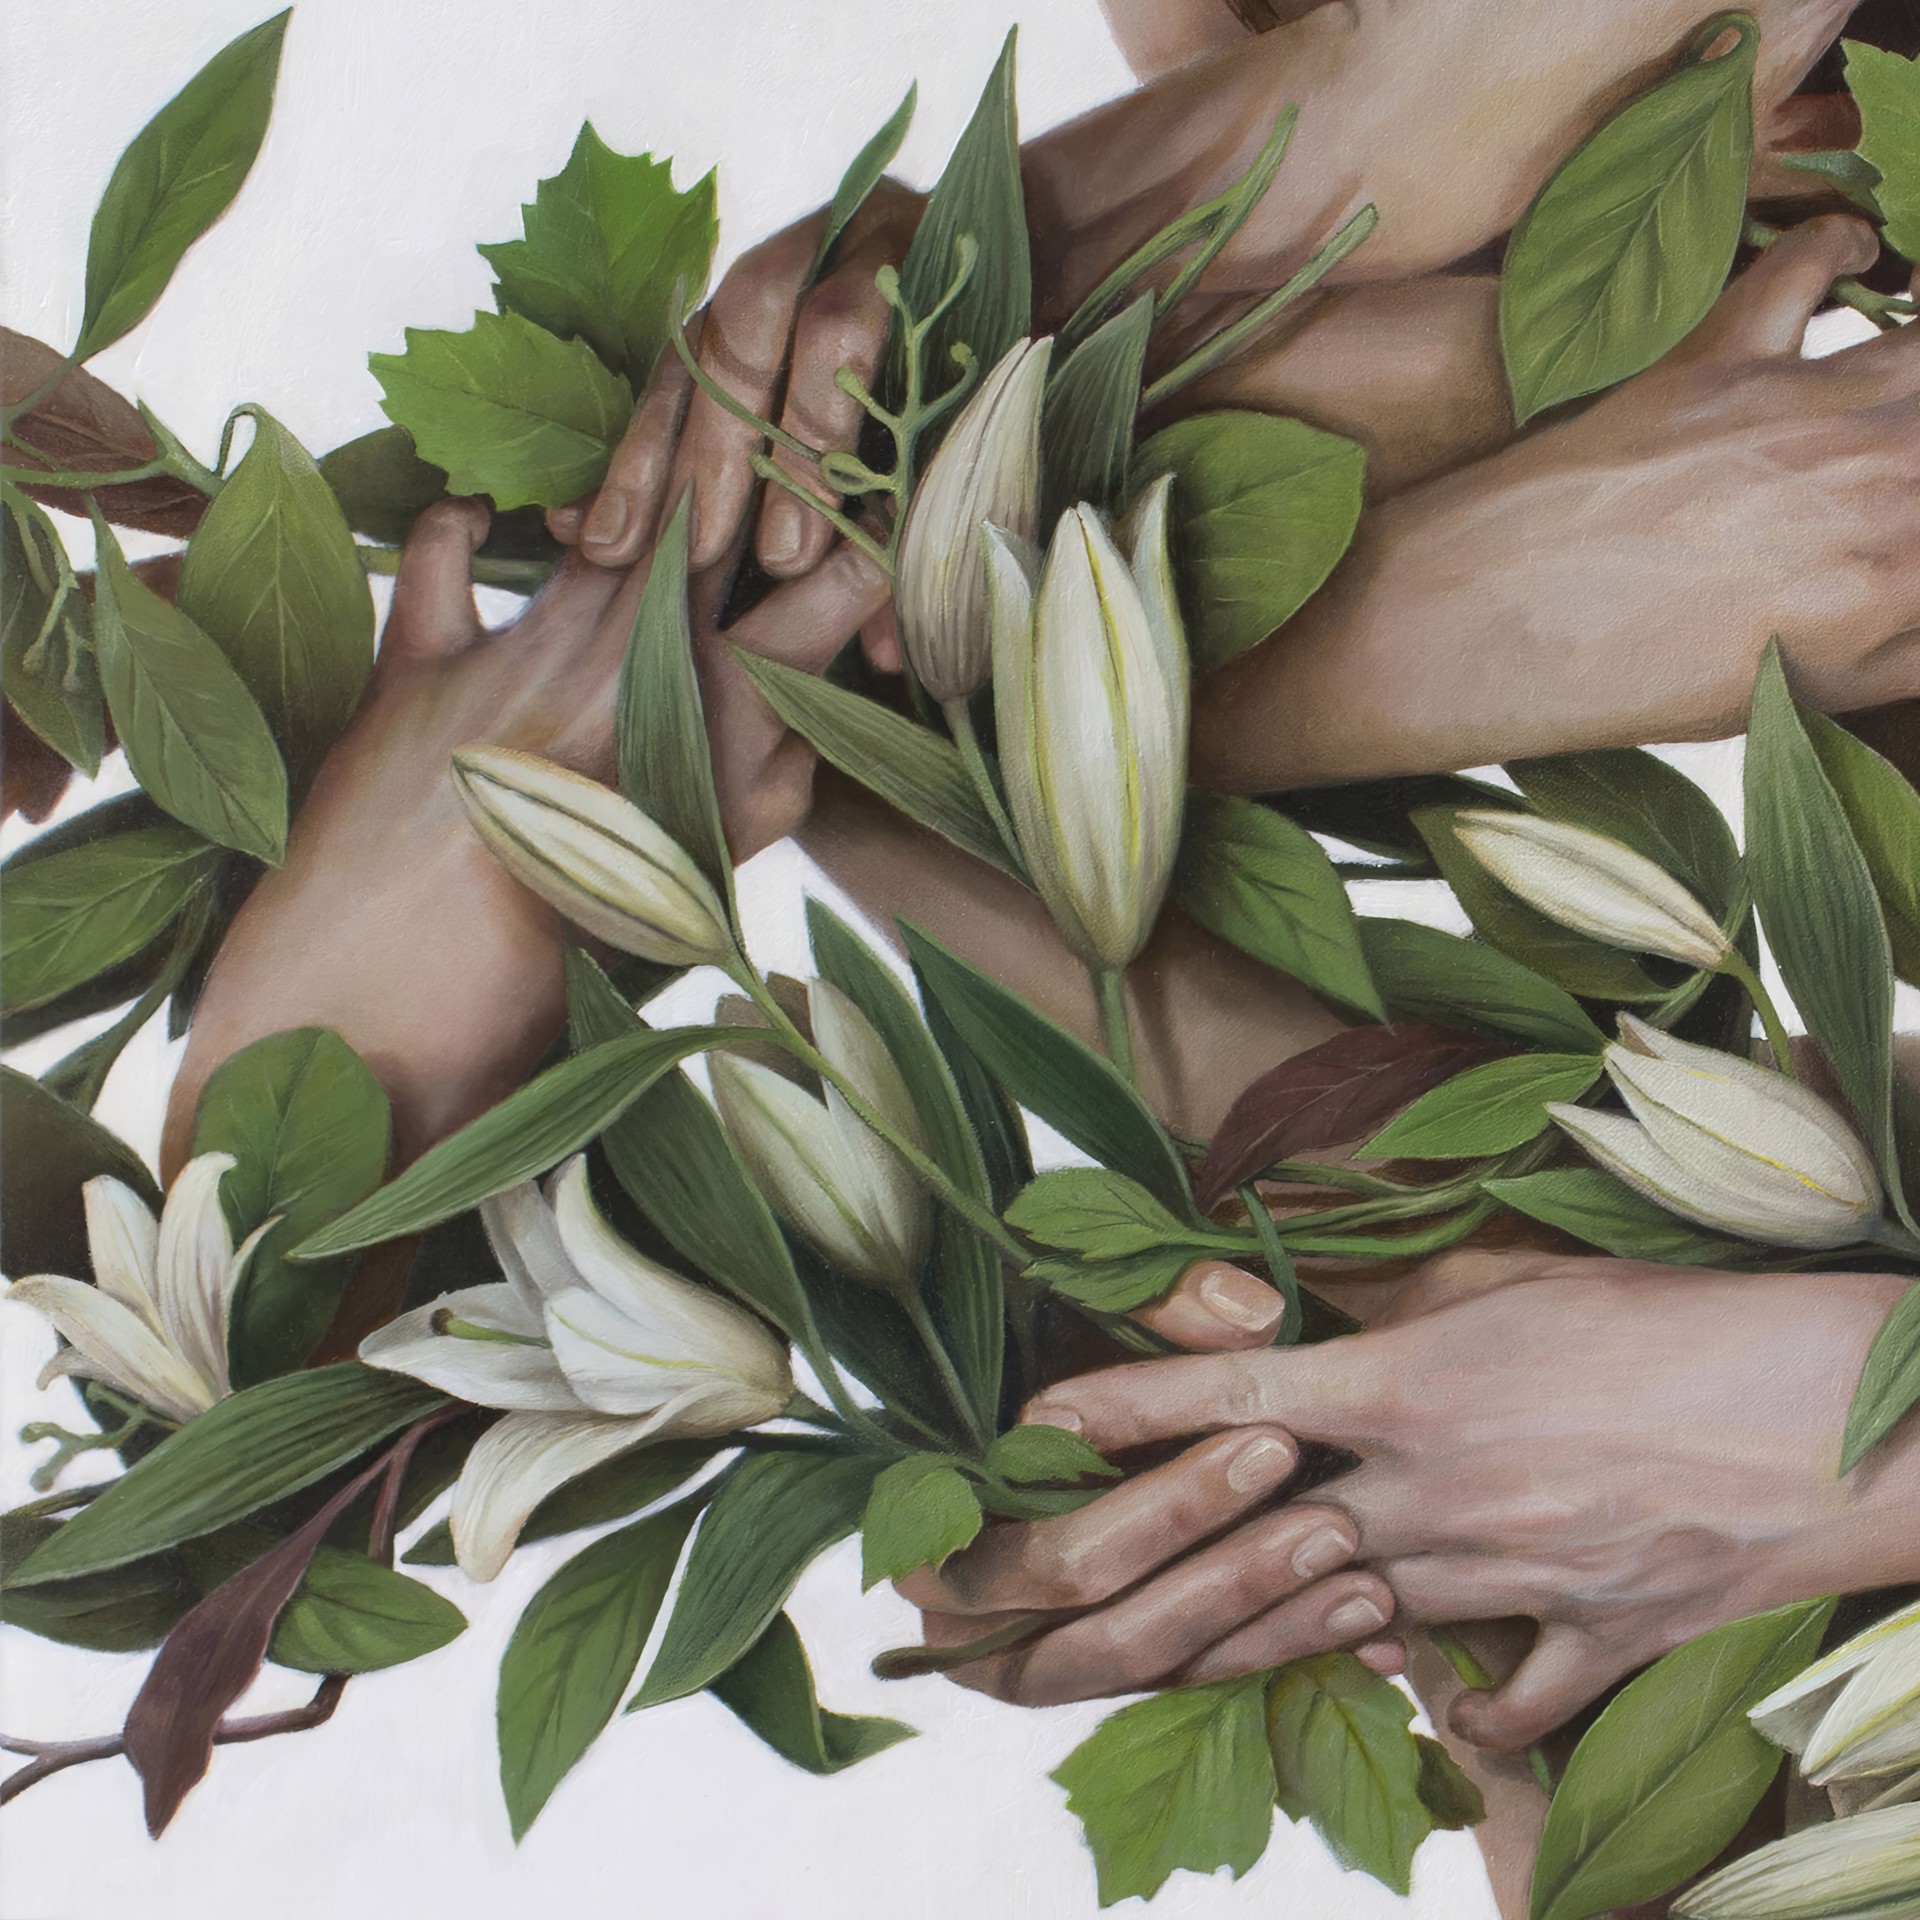 "With Kindness" by Victoria Novak, an oil painting depicting multiple hands gently holding various green leaves and white flower petals, set against a light background.